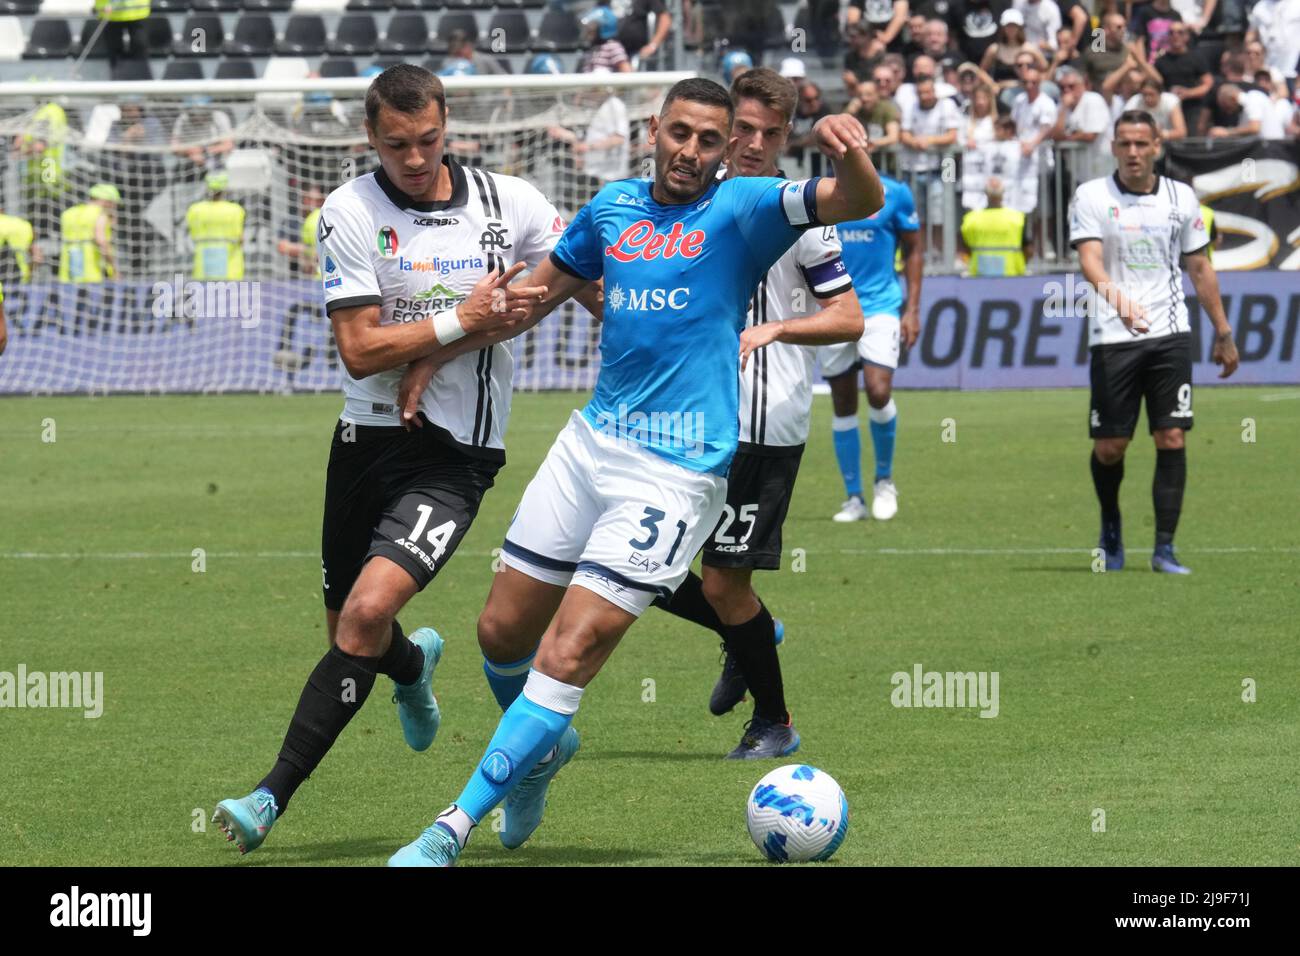 LA SPEZIA, ITALY - MAY 22: Faouzi Ghoulam of SSC Napoli competes for the ball with Jakub Kiwior of Spezia Calcio ,during the Serie A match between Spezia Calcio and SSC Napoli at Stadio Alberto Picco on May 22, 2022 in La Spezia, Italy. (Photo by MB Media) Stock Photo